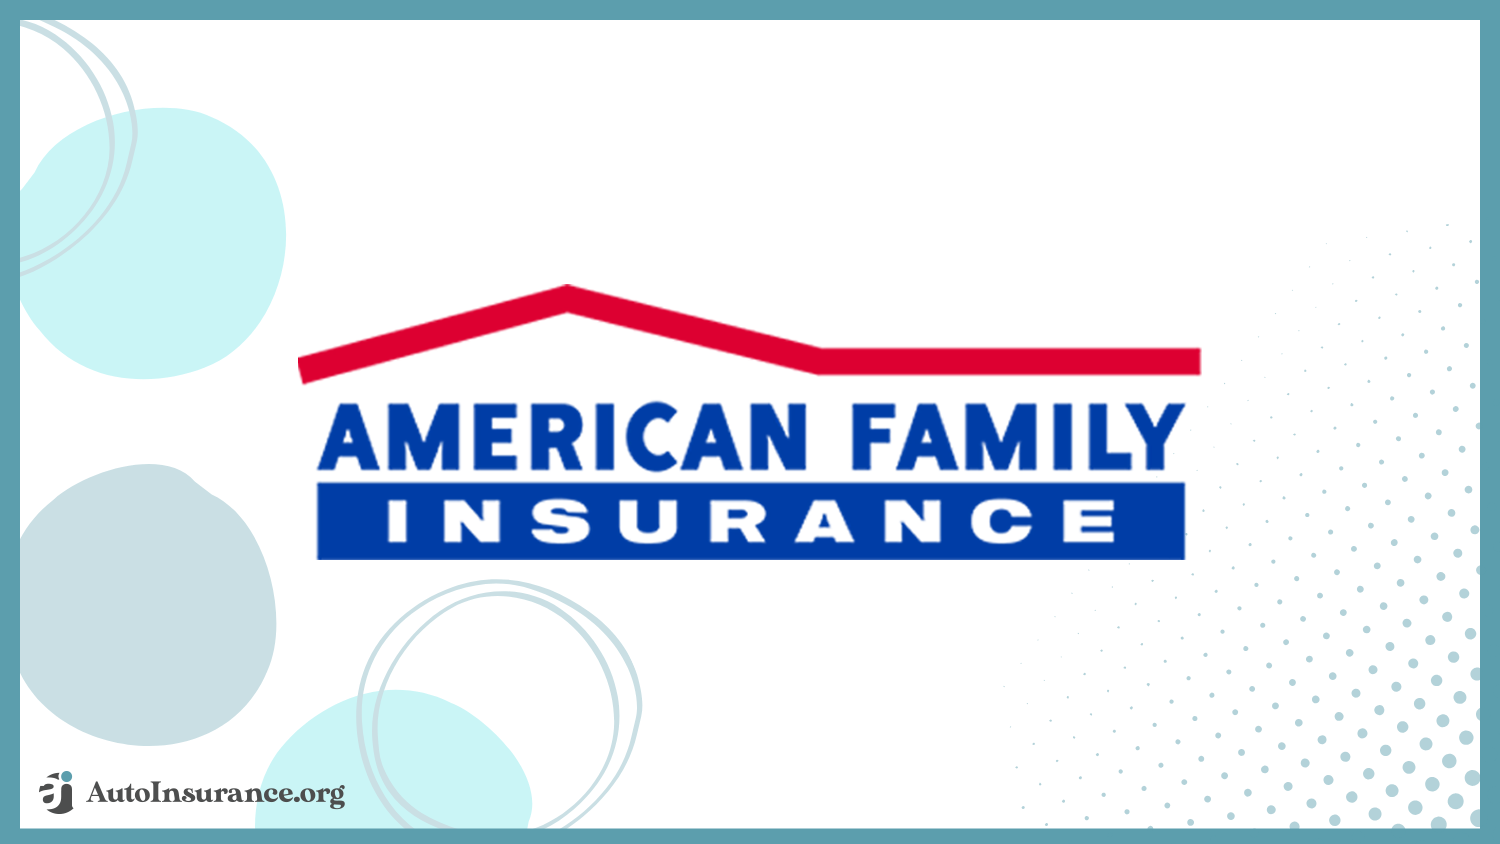 American Family: 10 Best Auto Insurance Companies that use LexisNexis